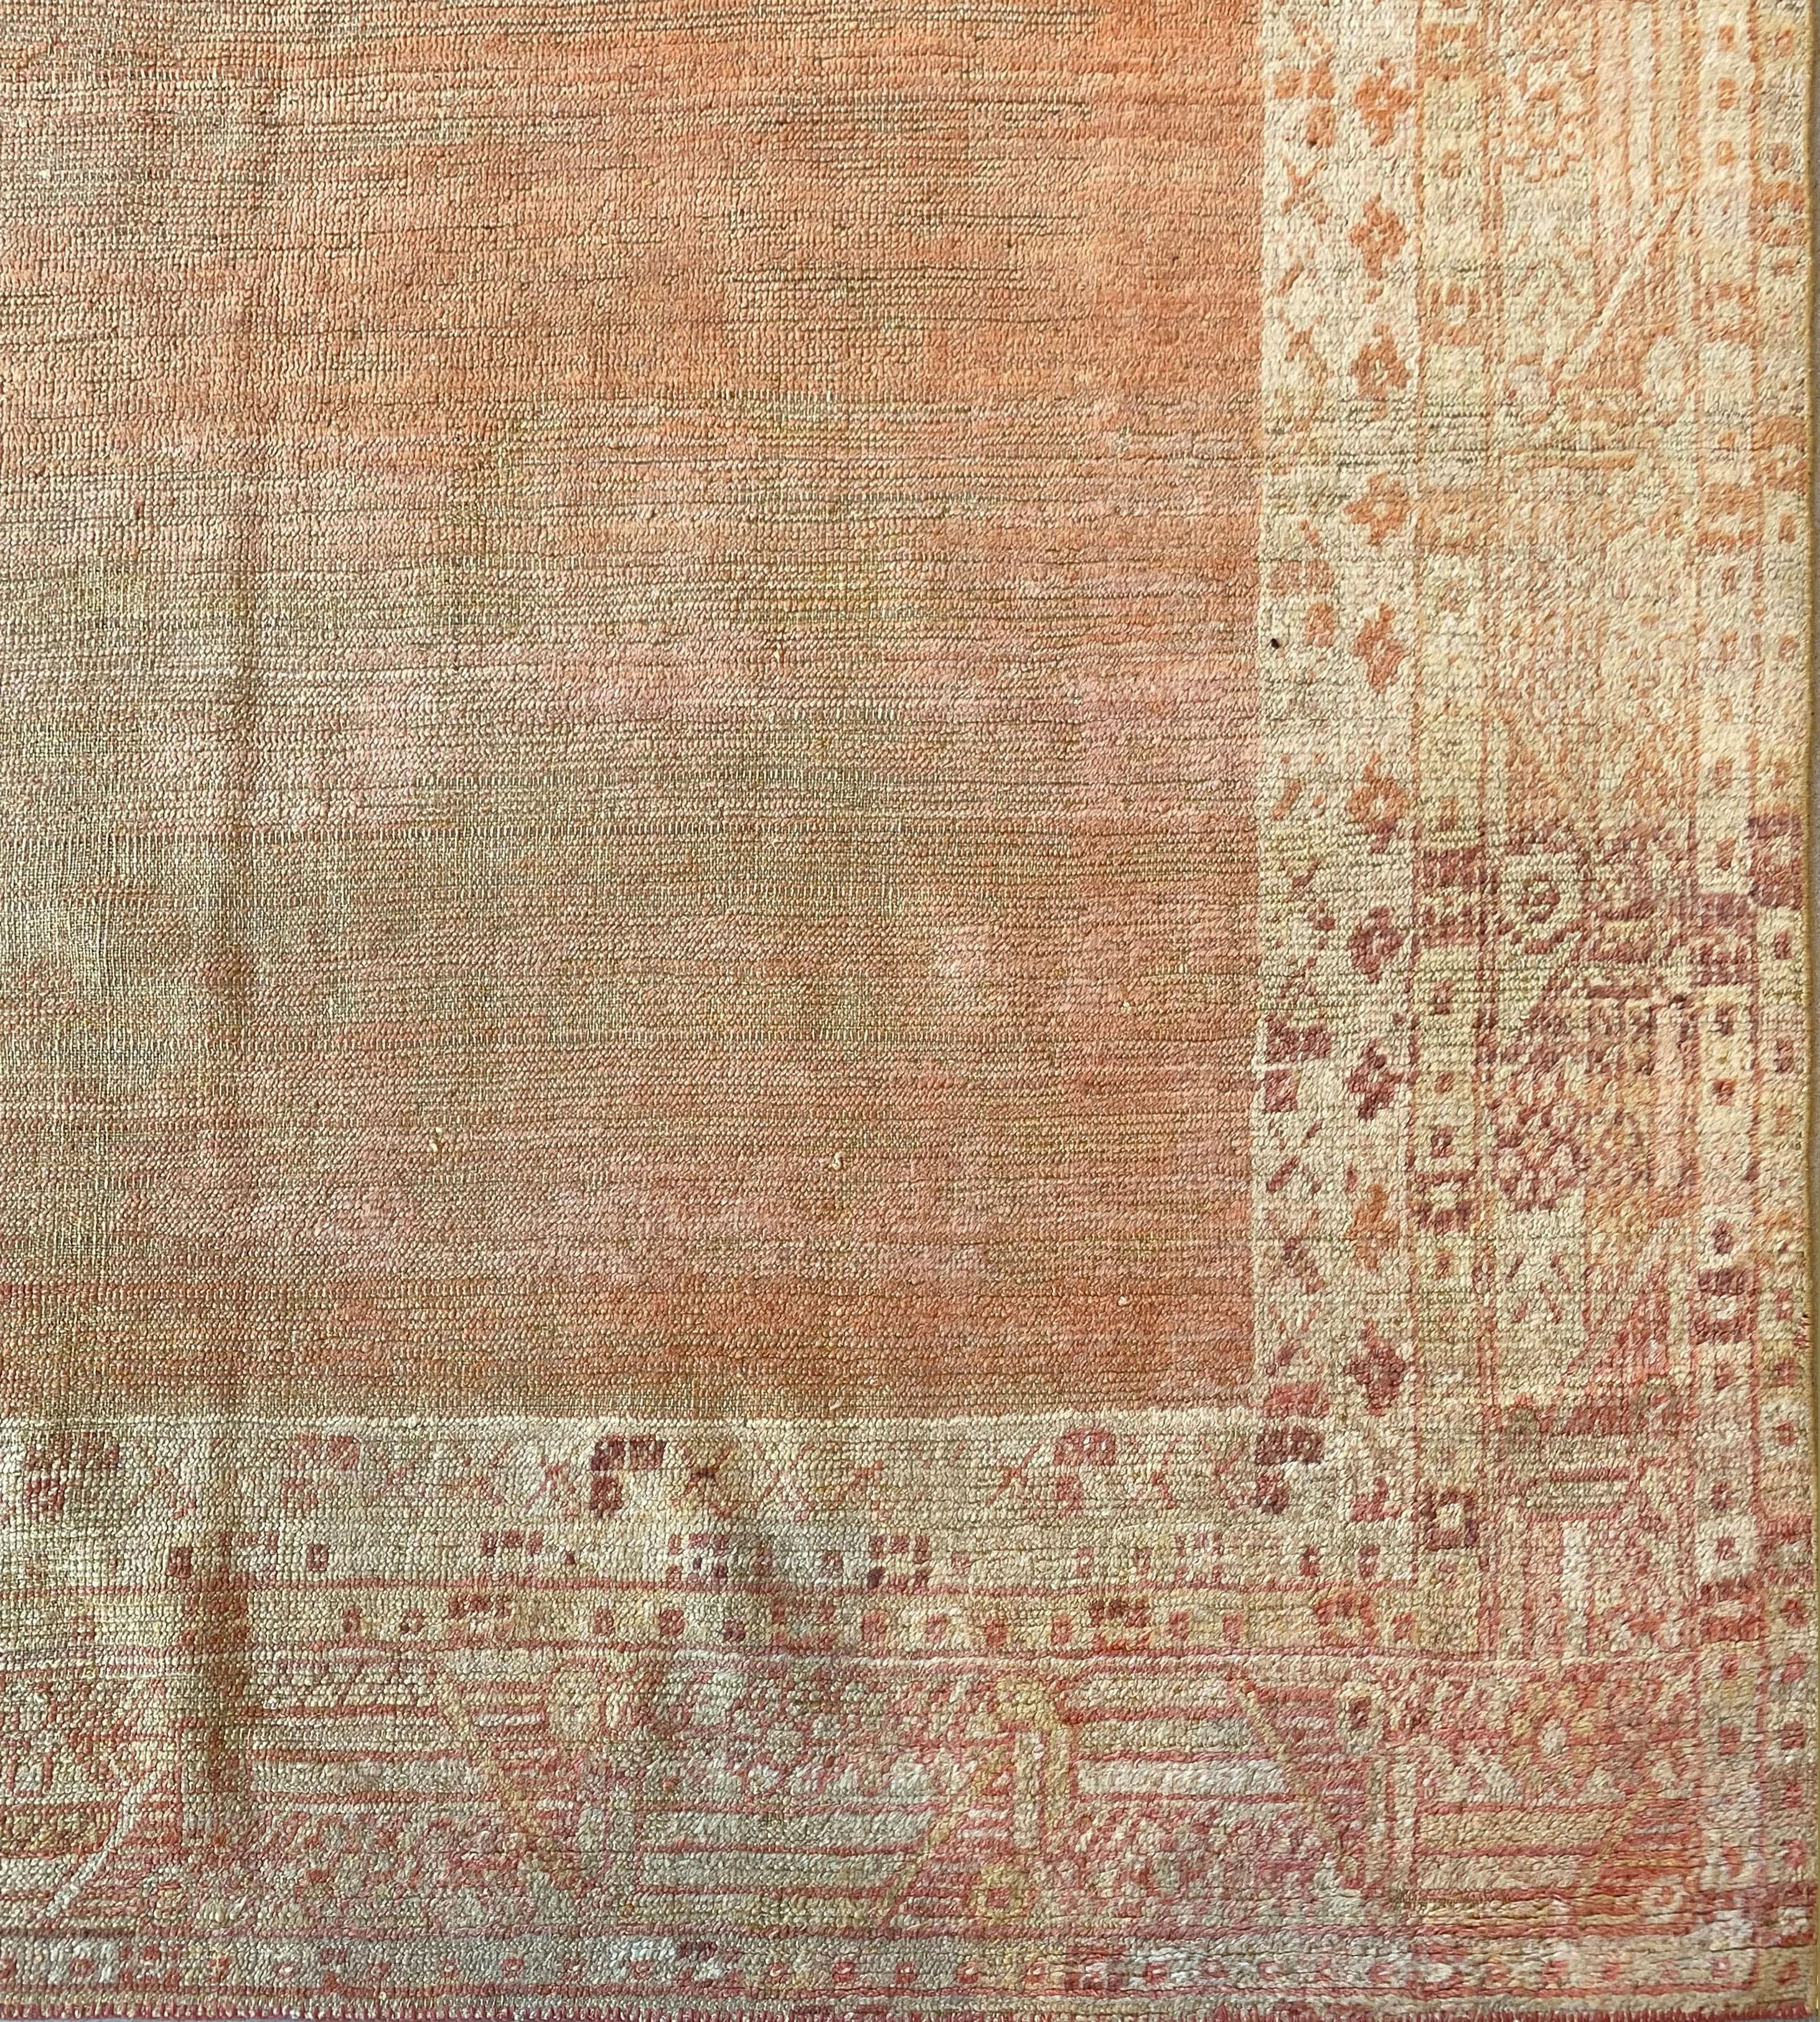 This antique Oushak rug has a plain shaded terracotta field, in a broad ivory border of terracotta and light brown linked panel floral vine between ivory narrow stripes containing flowerheads and angular floral vines.